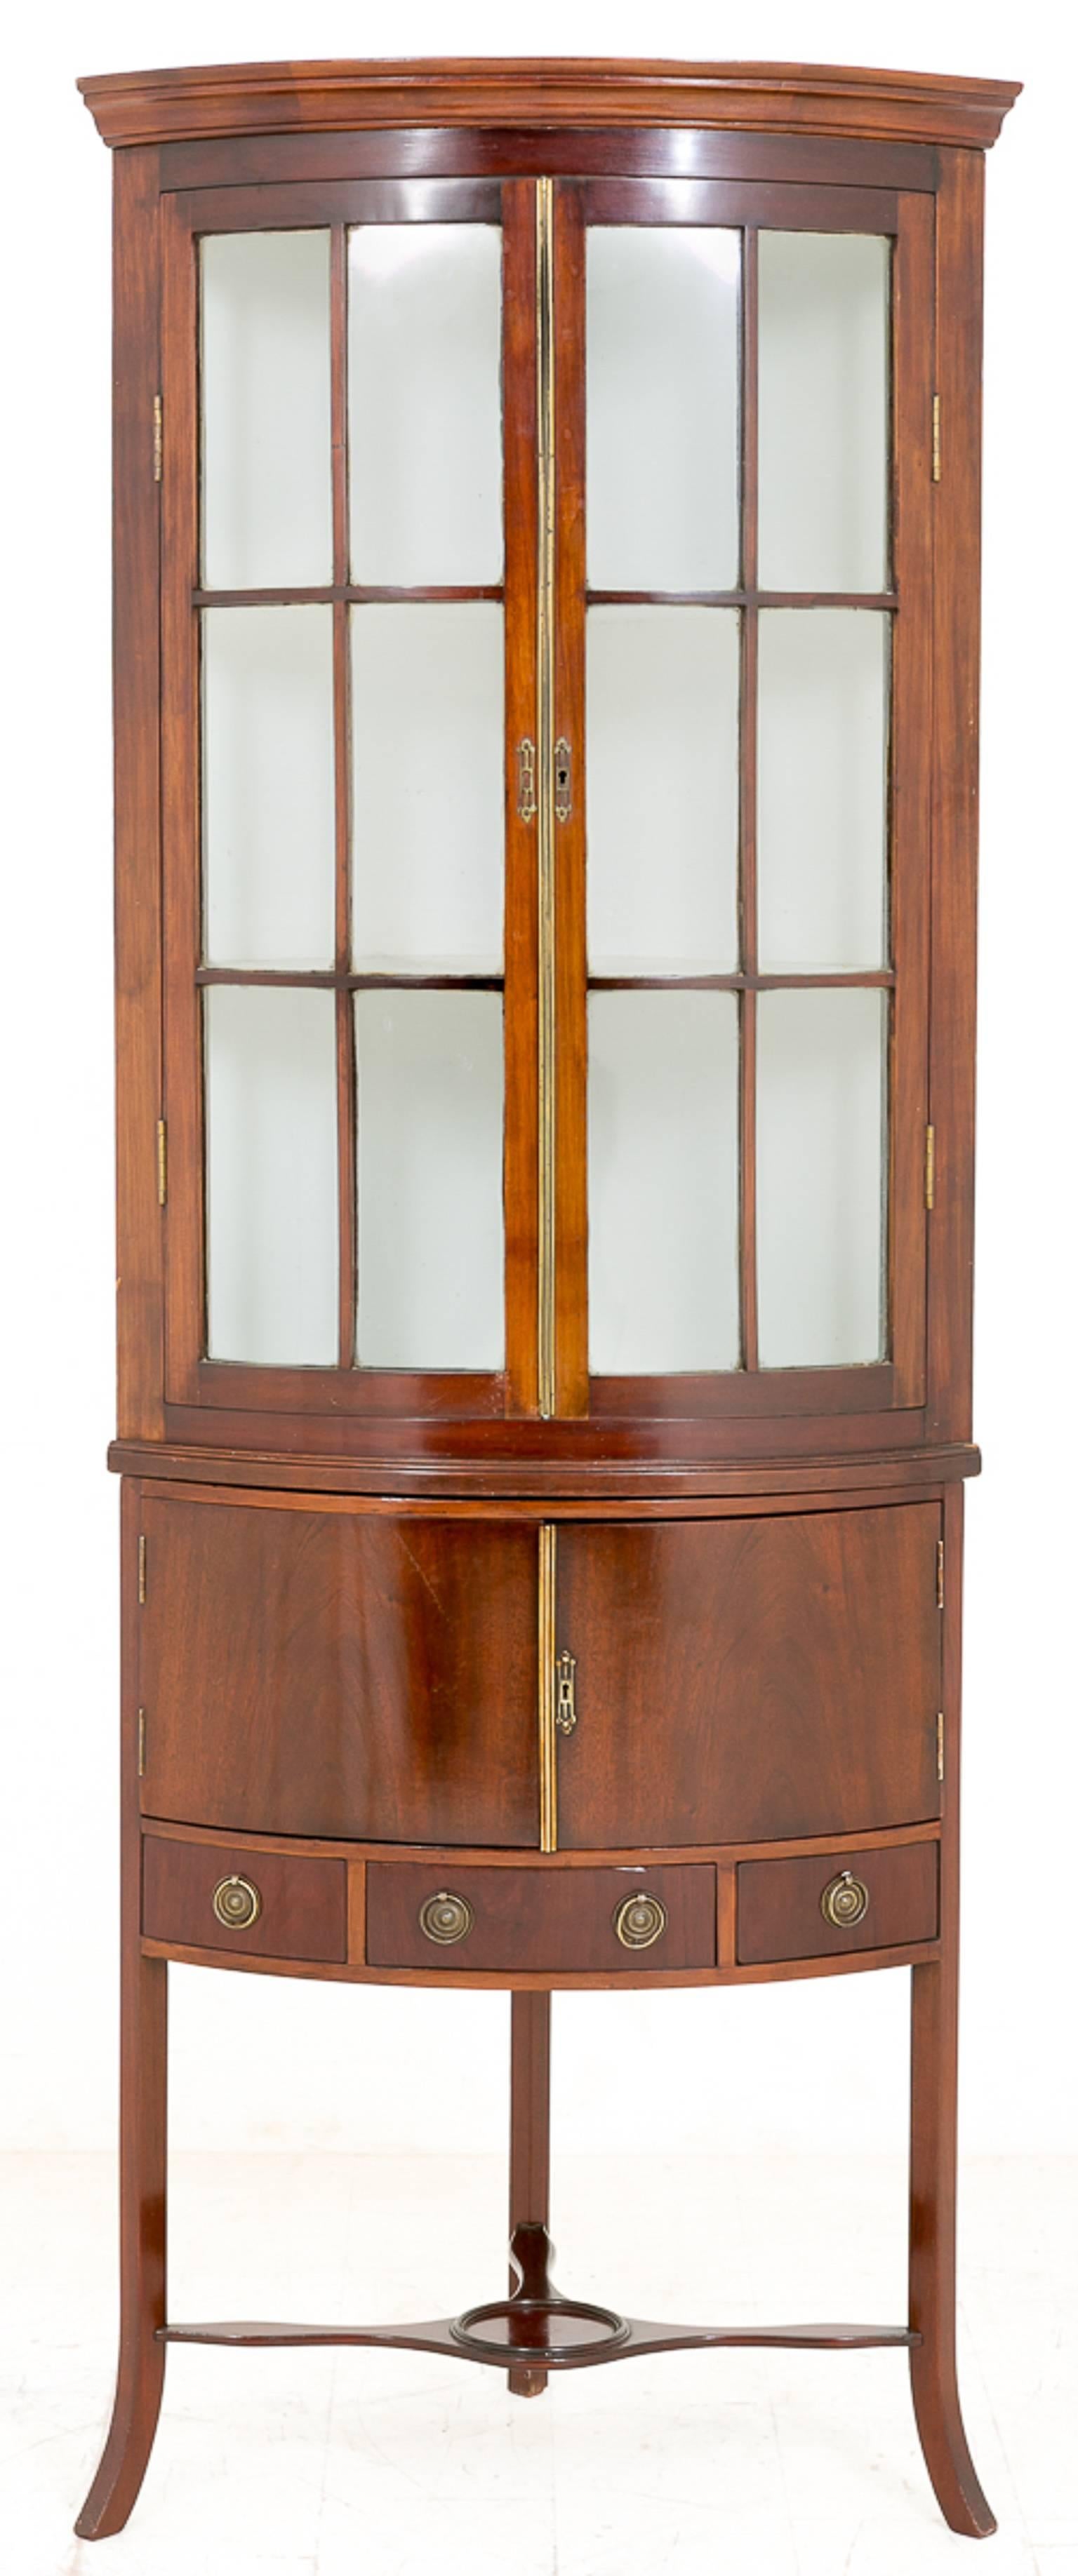 Early 20th Century Mahogany Corner Cabinet with Georgian Influences For Sale